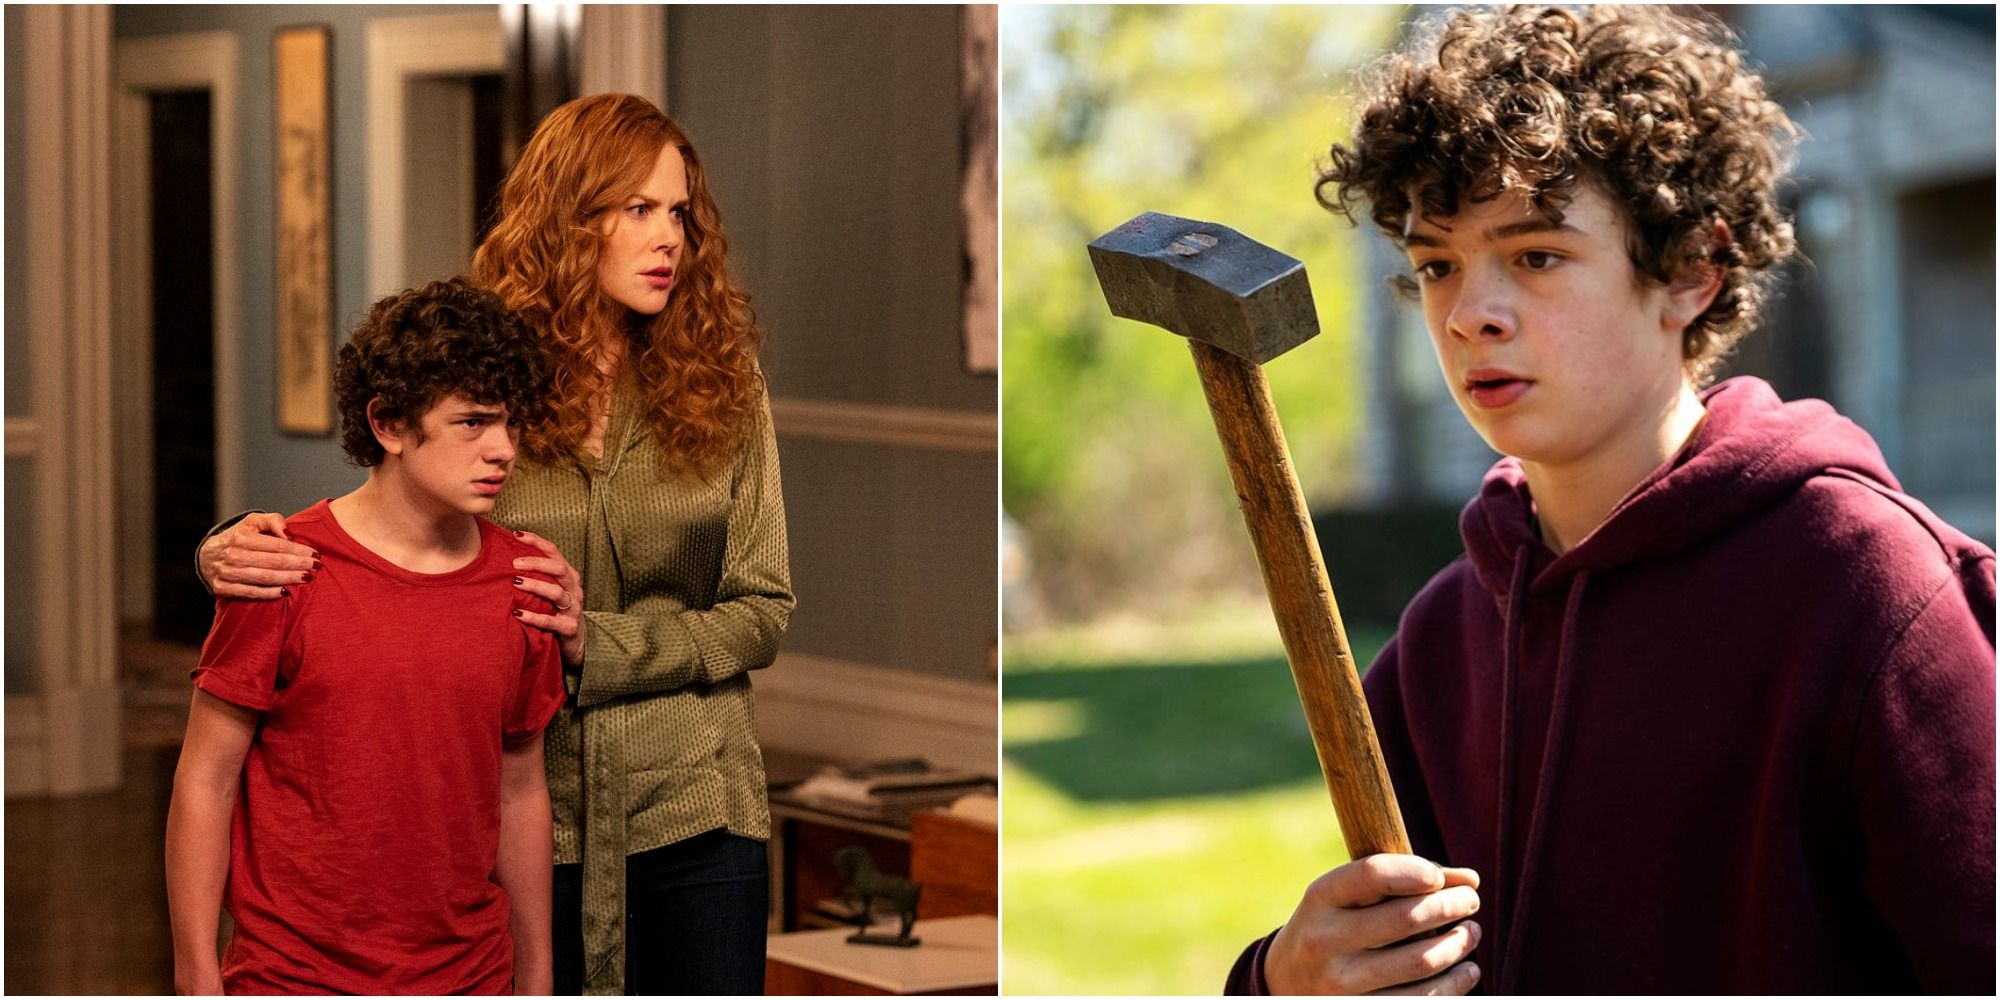 A Quiet Place’s Marcus Abbott & 9 Other Characters Noah Jupe Has Brought To Life